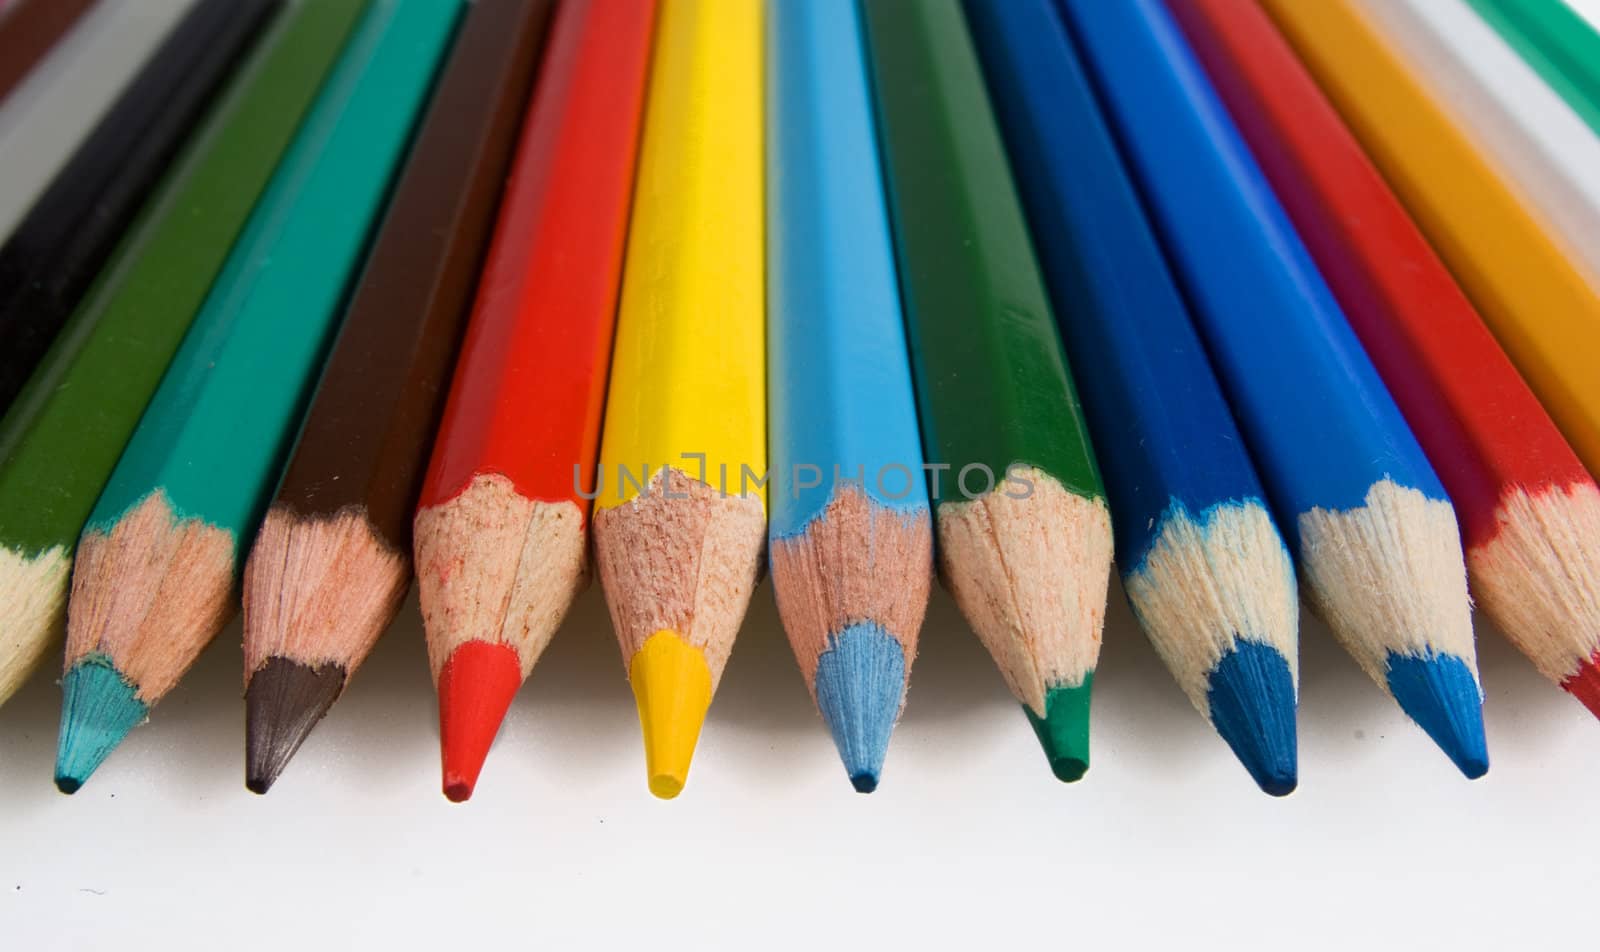 Clouse-up of group of color pencils